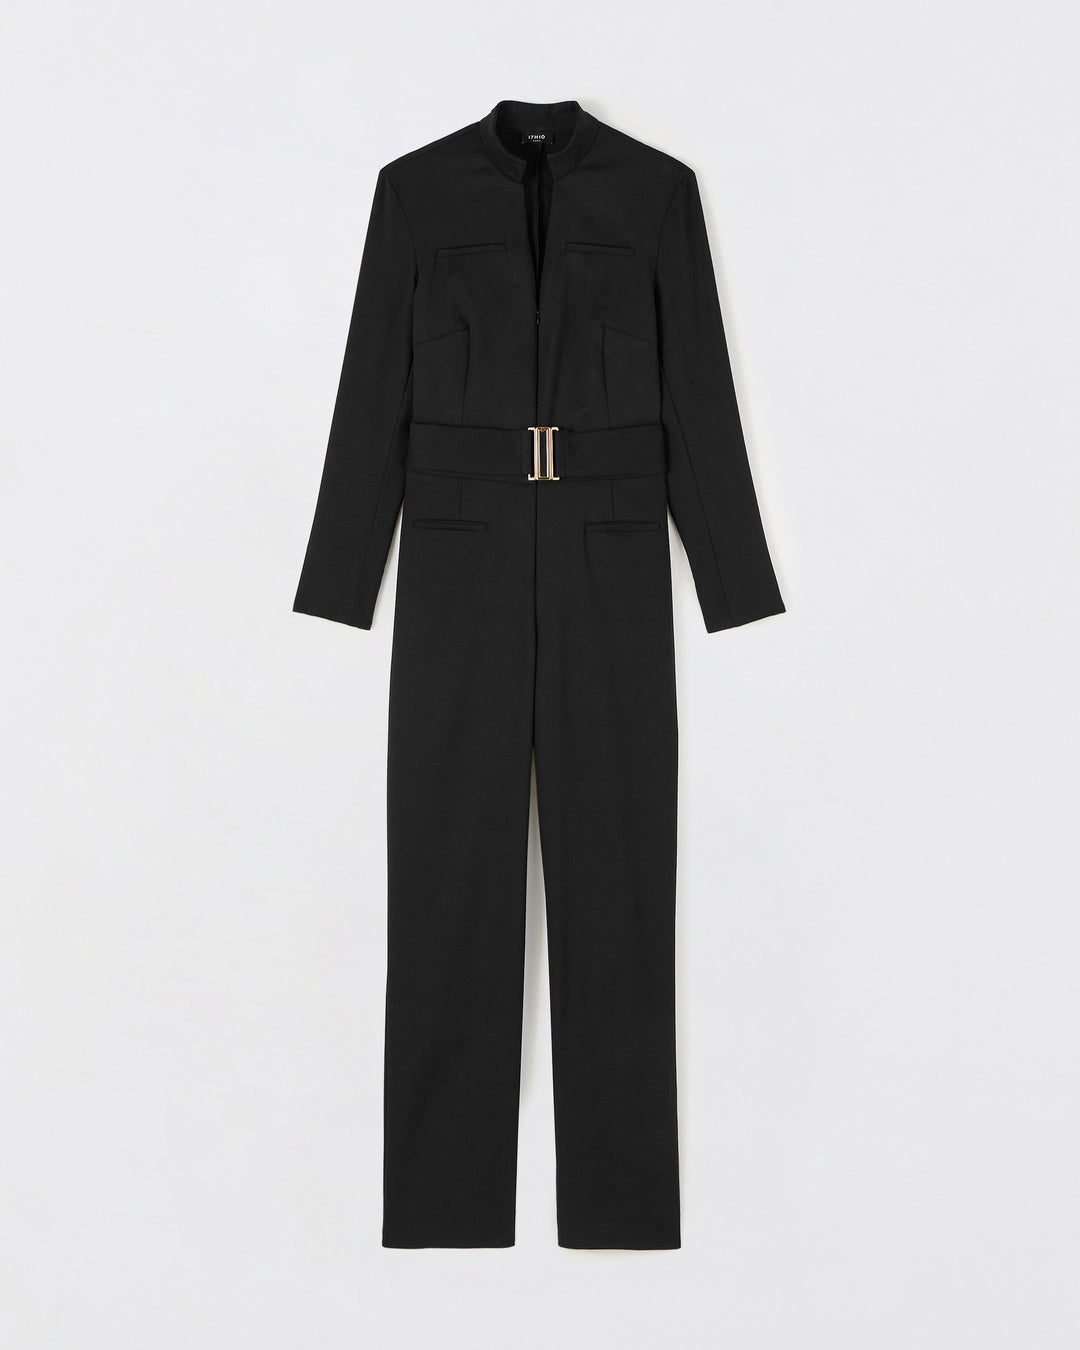 Jumpsuit-black-Removable-belt-tone-on-tone-with-buckle-Neck-in-V-Two-buttons-tone-on-tone-at-wrist-four-pockets-underpocket-17H10-tailors-for-women-paris-